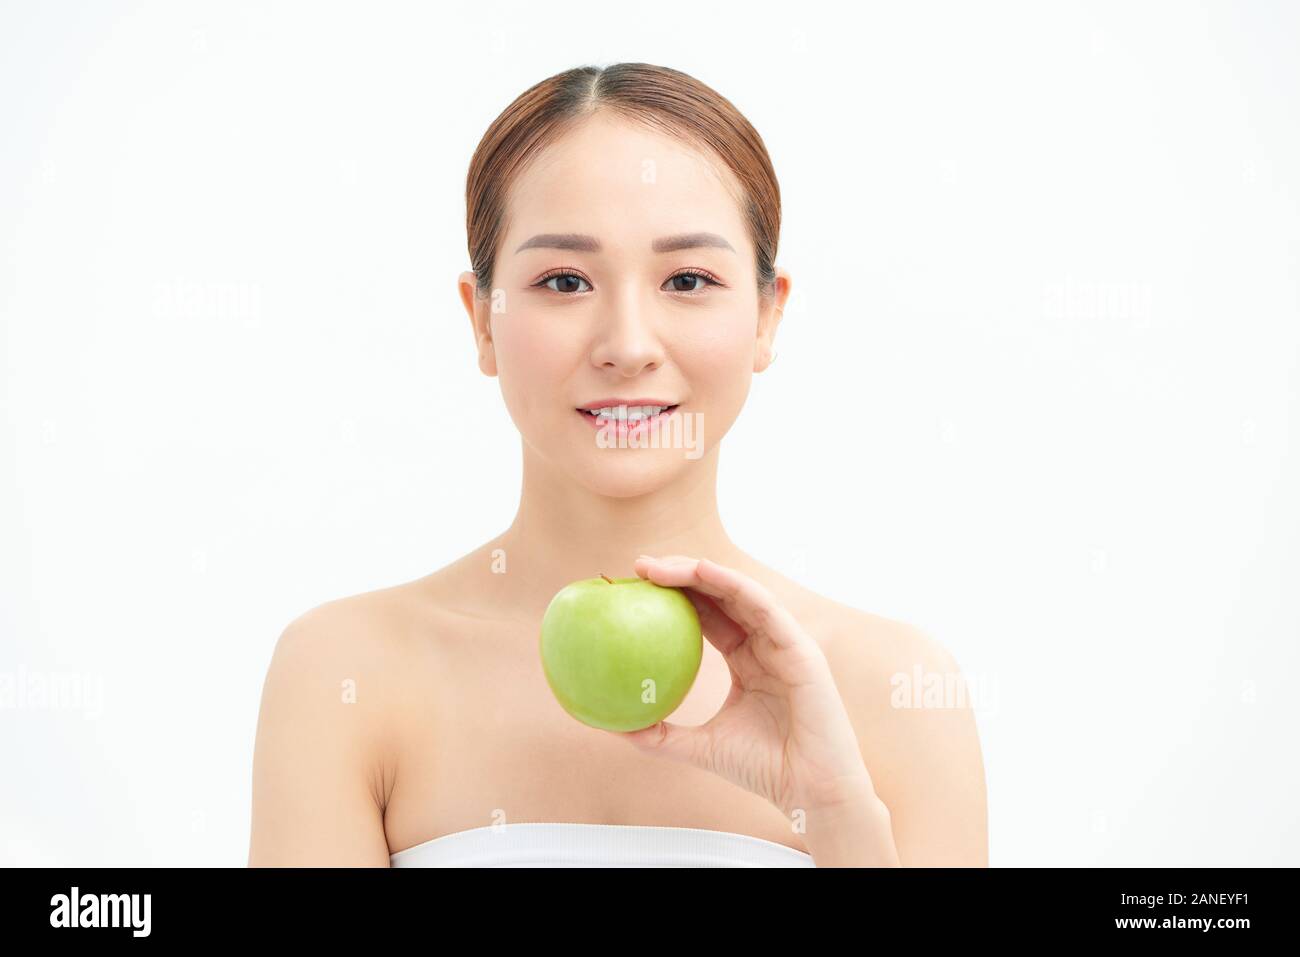 Smiling pretty model holding apple while posing on white background Stock Photo